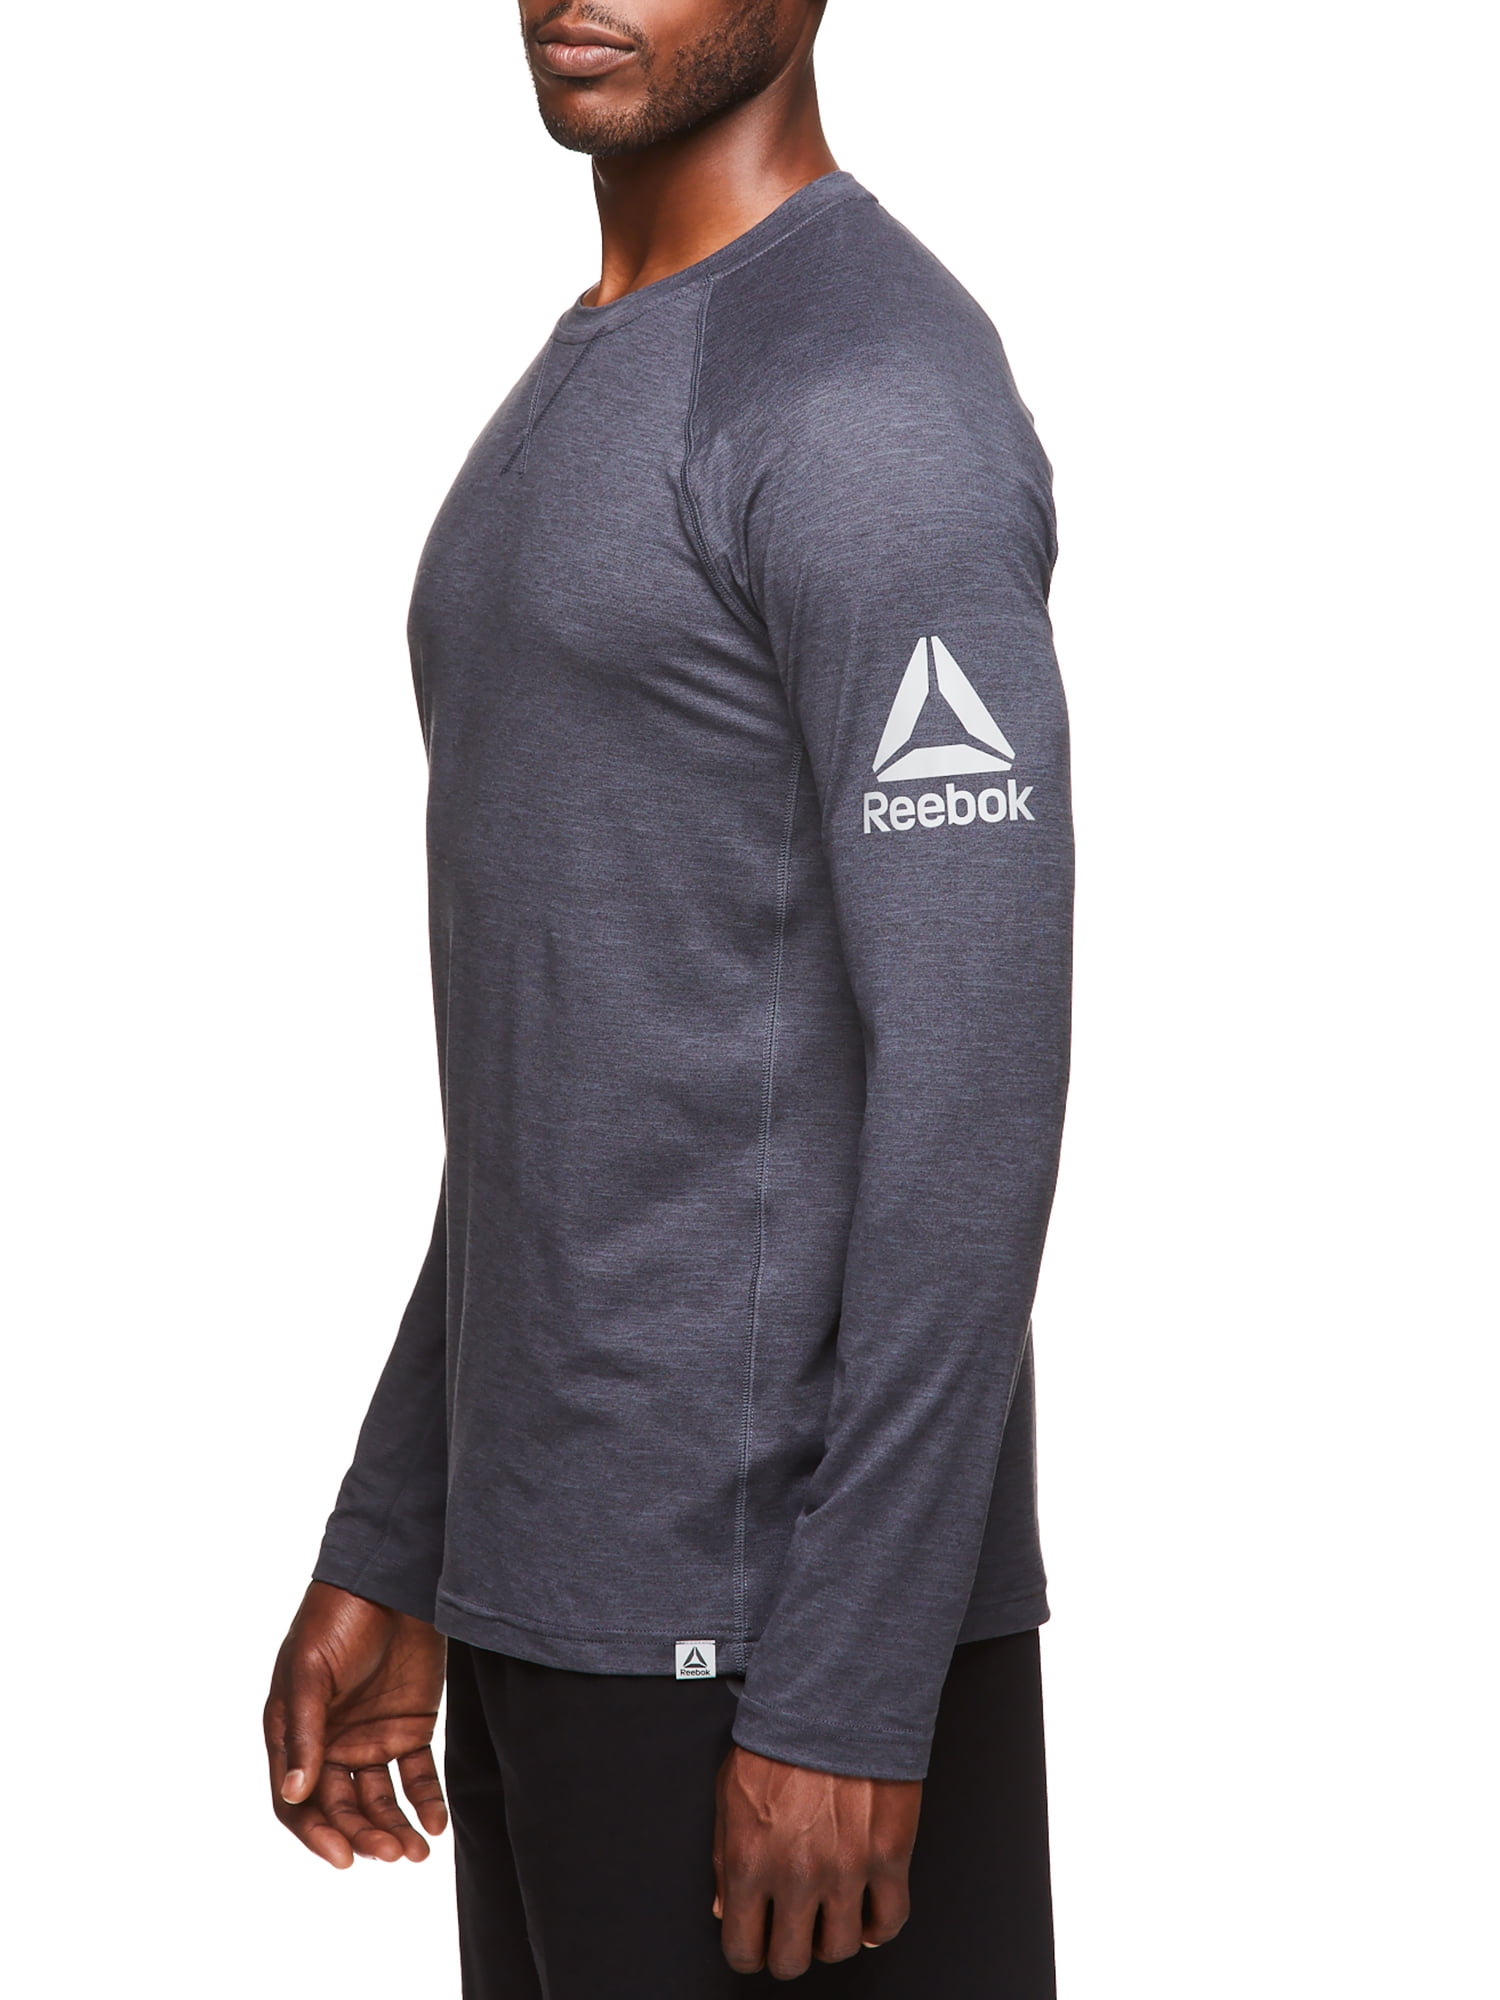 Reebok Men's and Men's Active Long Sleeve Warm-Up Training Crew, to Size -